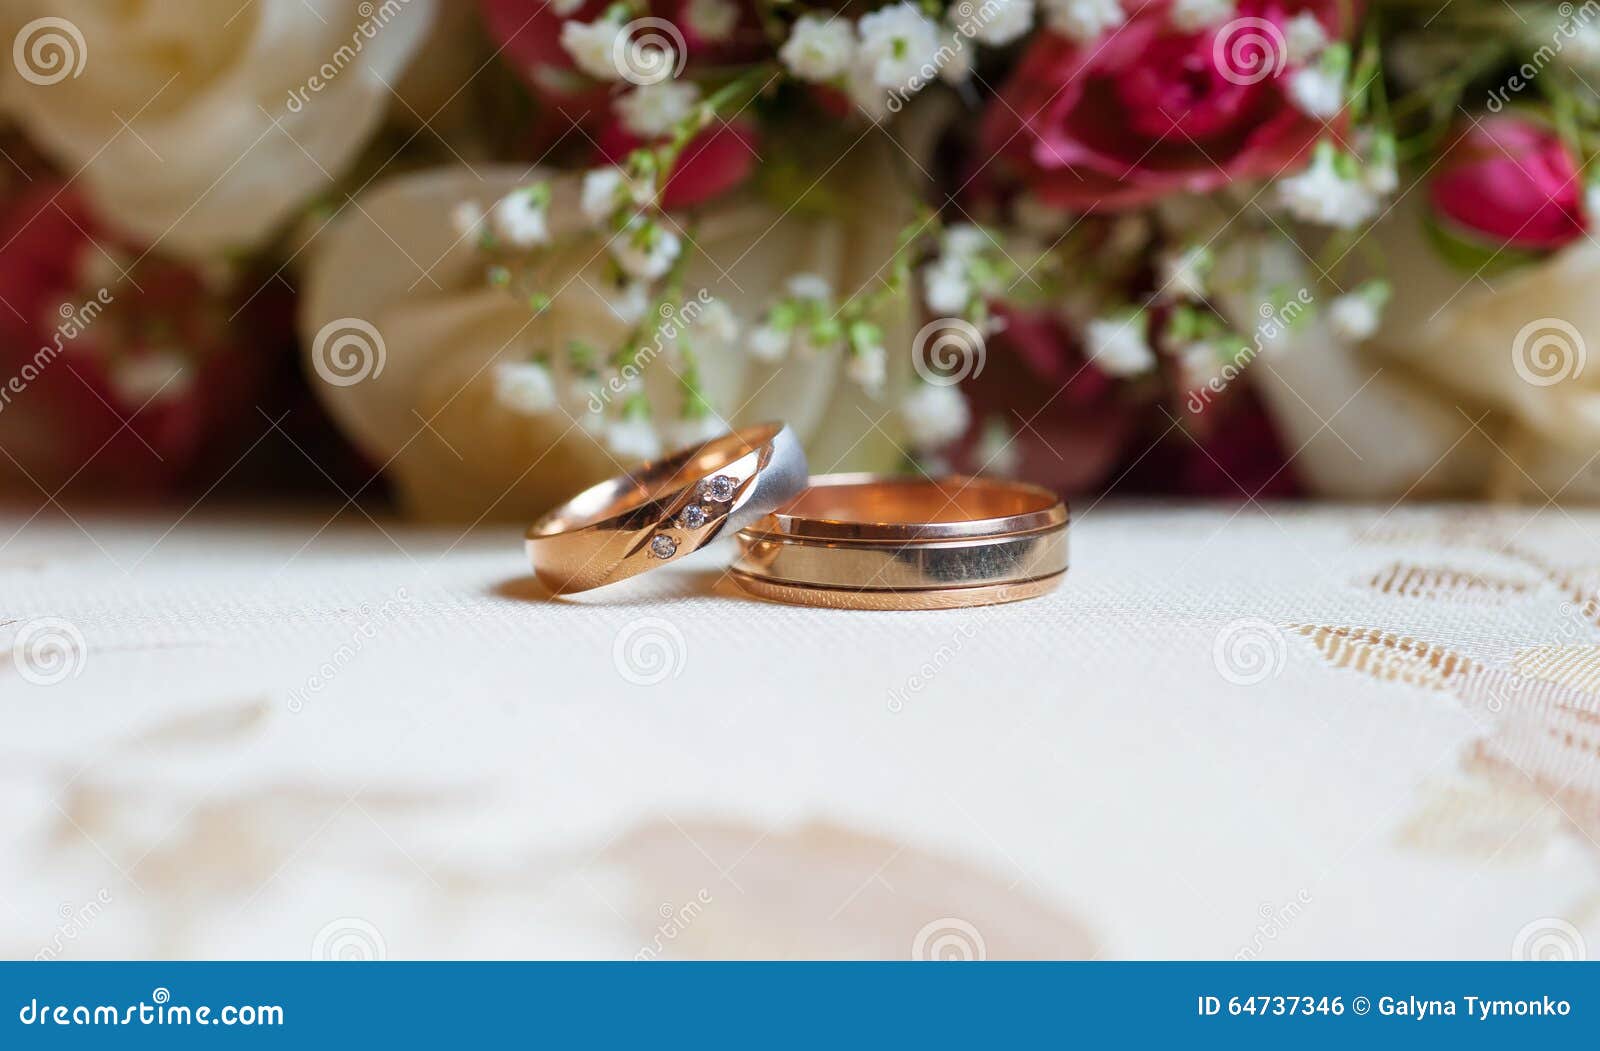 Wedding Gold Rings On A Background Of Red Roses Stock Photo - Image of ...